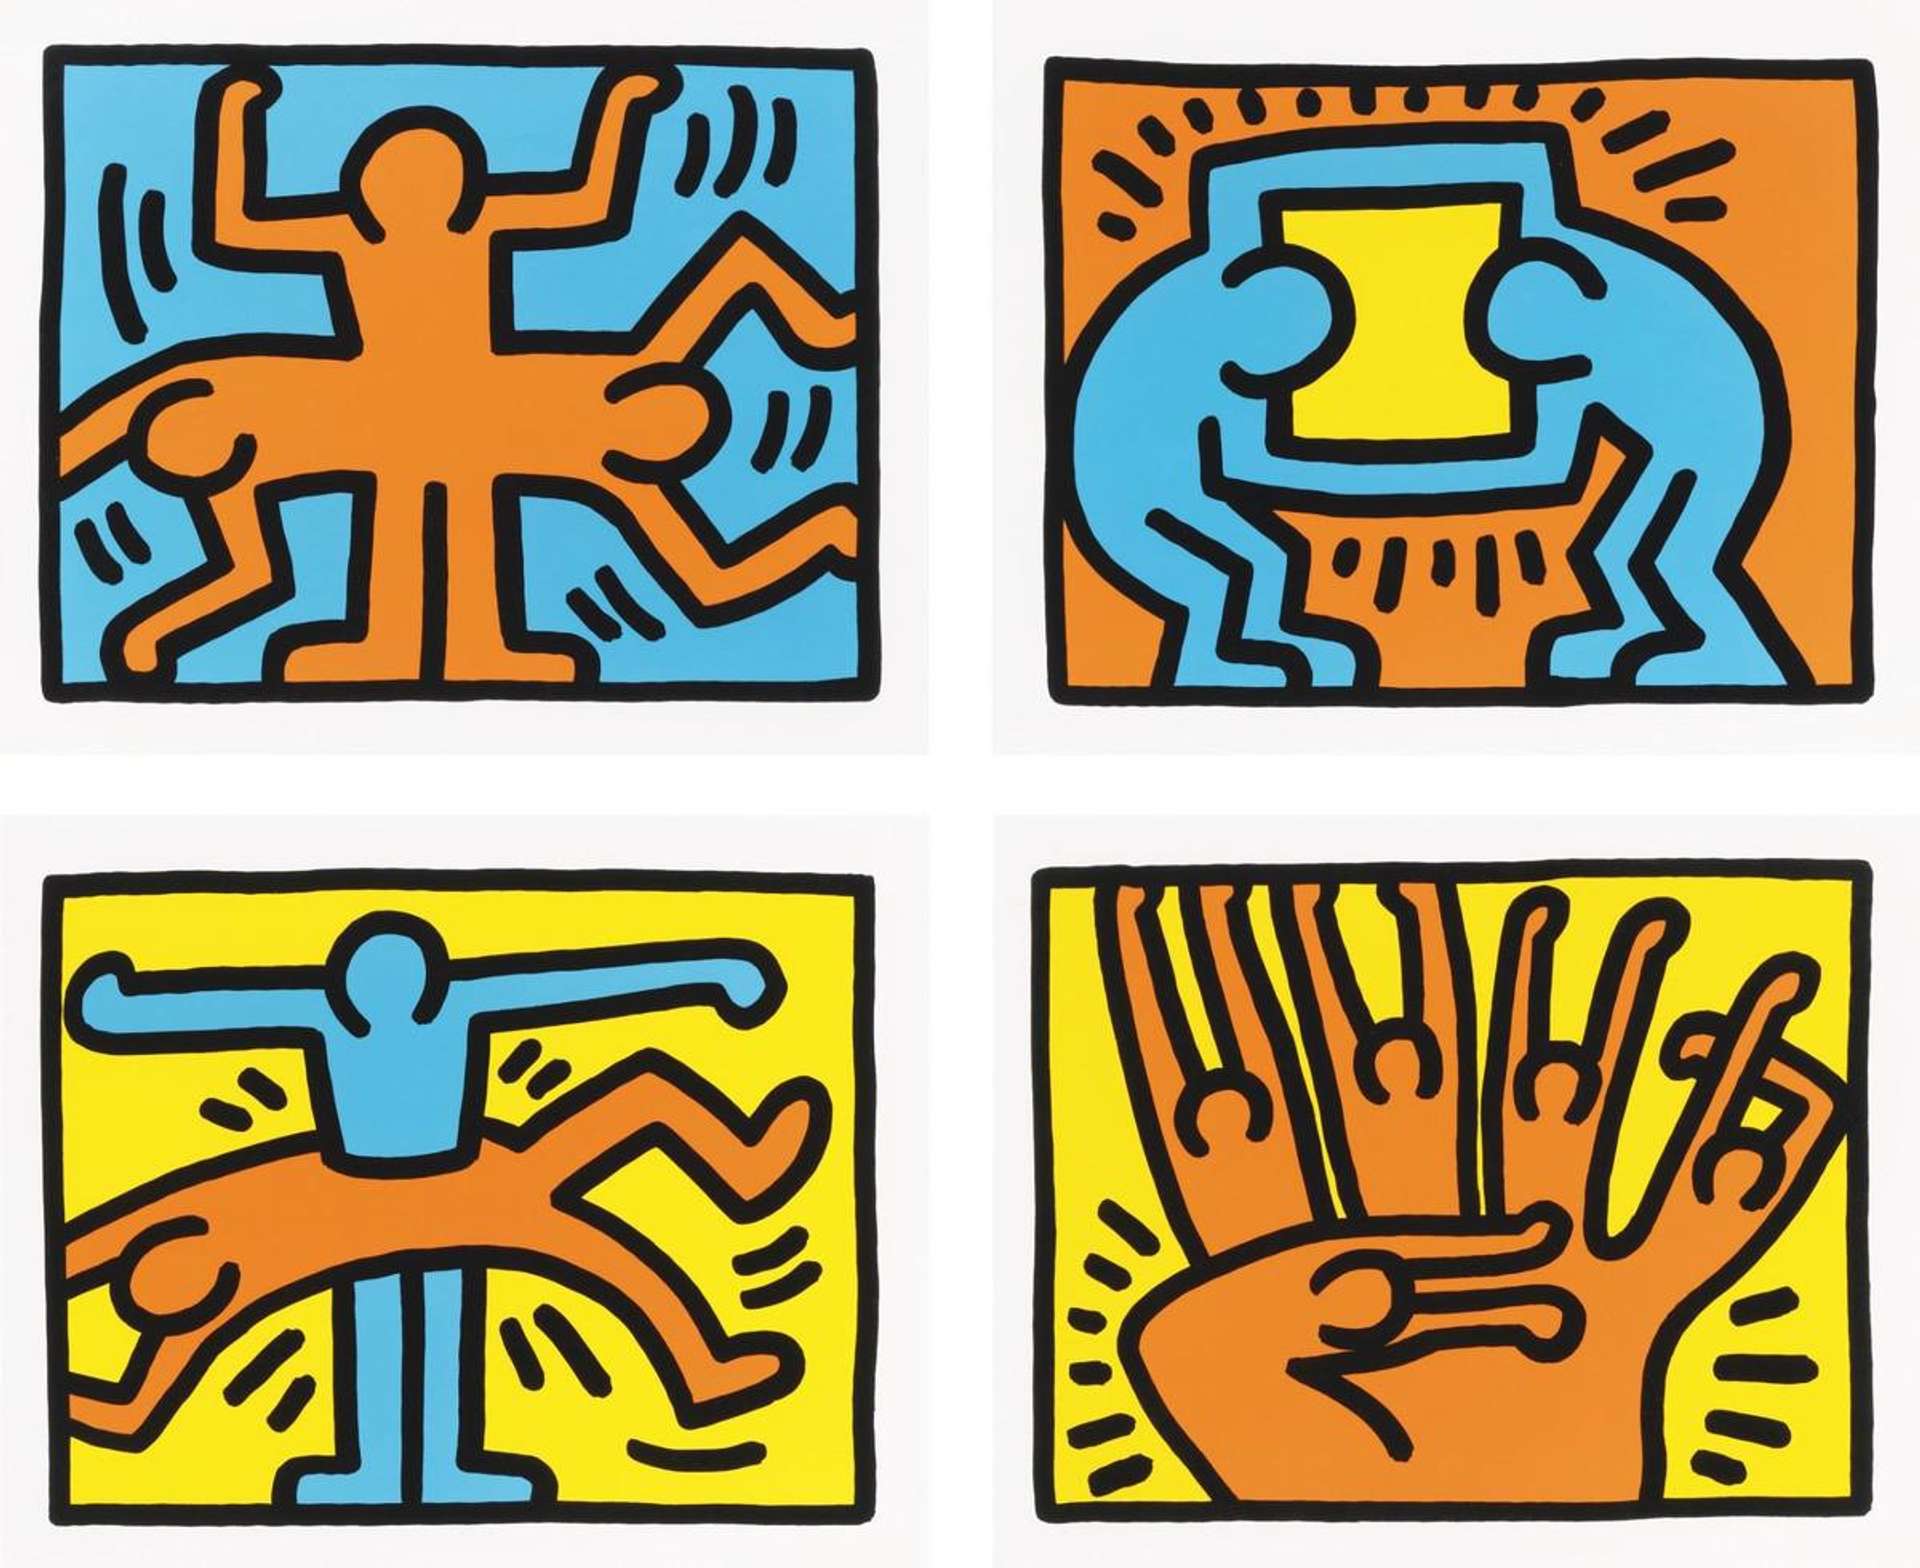 A set of four screenprints by Keith Haring depicting cartoonish figures in various states of movement, in a palette of blue, orange, and yellow.